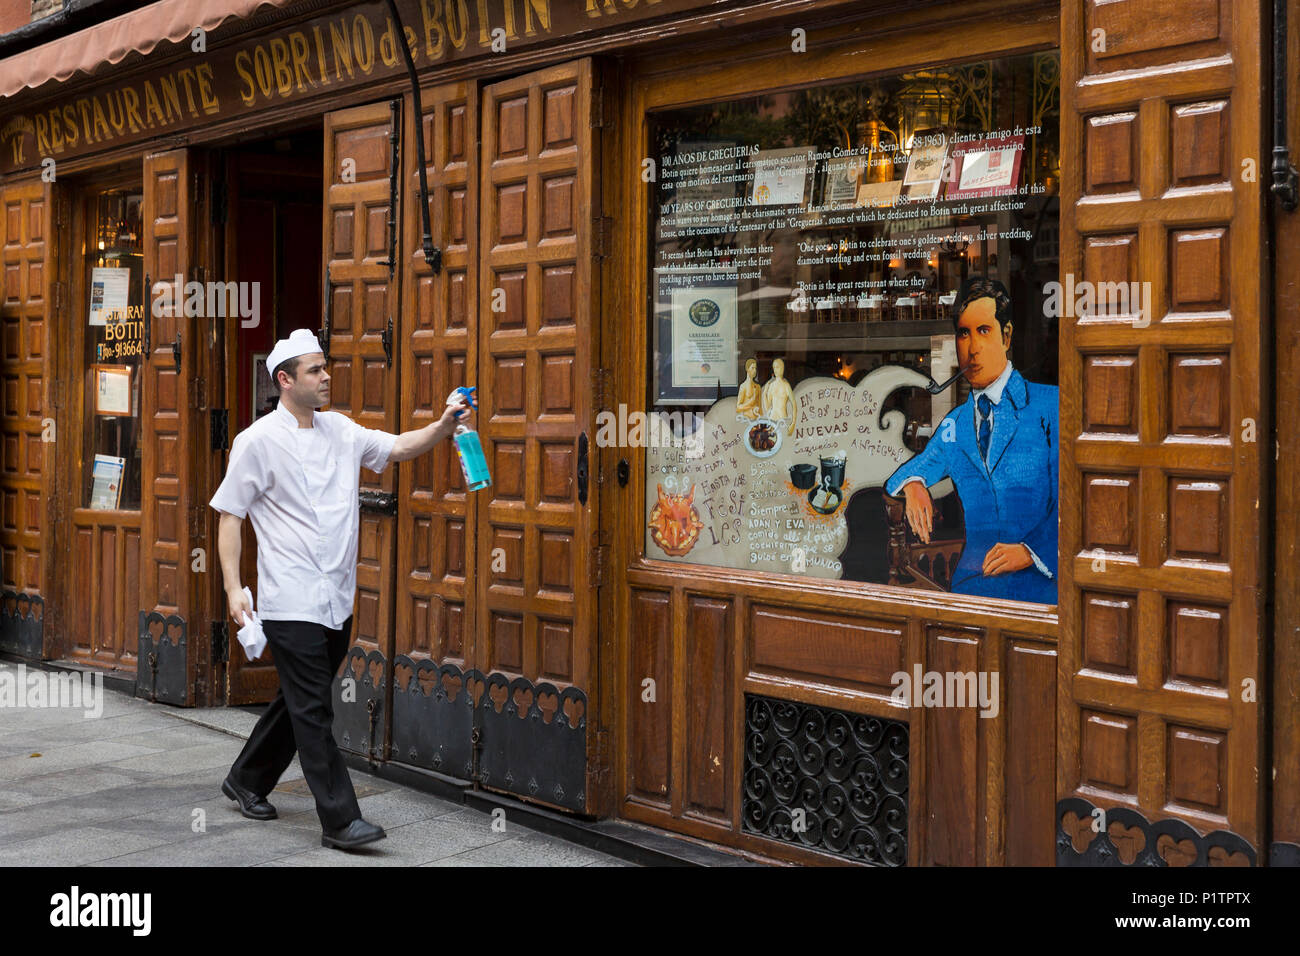 Madrid, Spain: A worker cleans the front window of Restaurante Sobrino de Botín. Originally founded in 1725 as Casa Botín, it is known as the oldest c Stock Photo